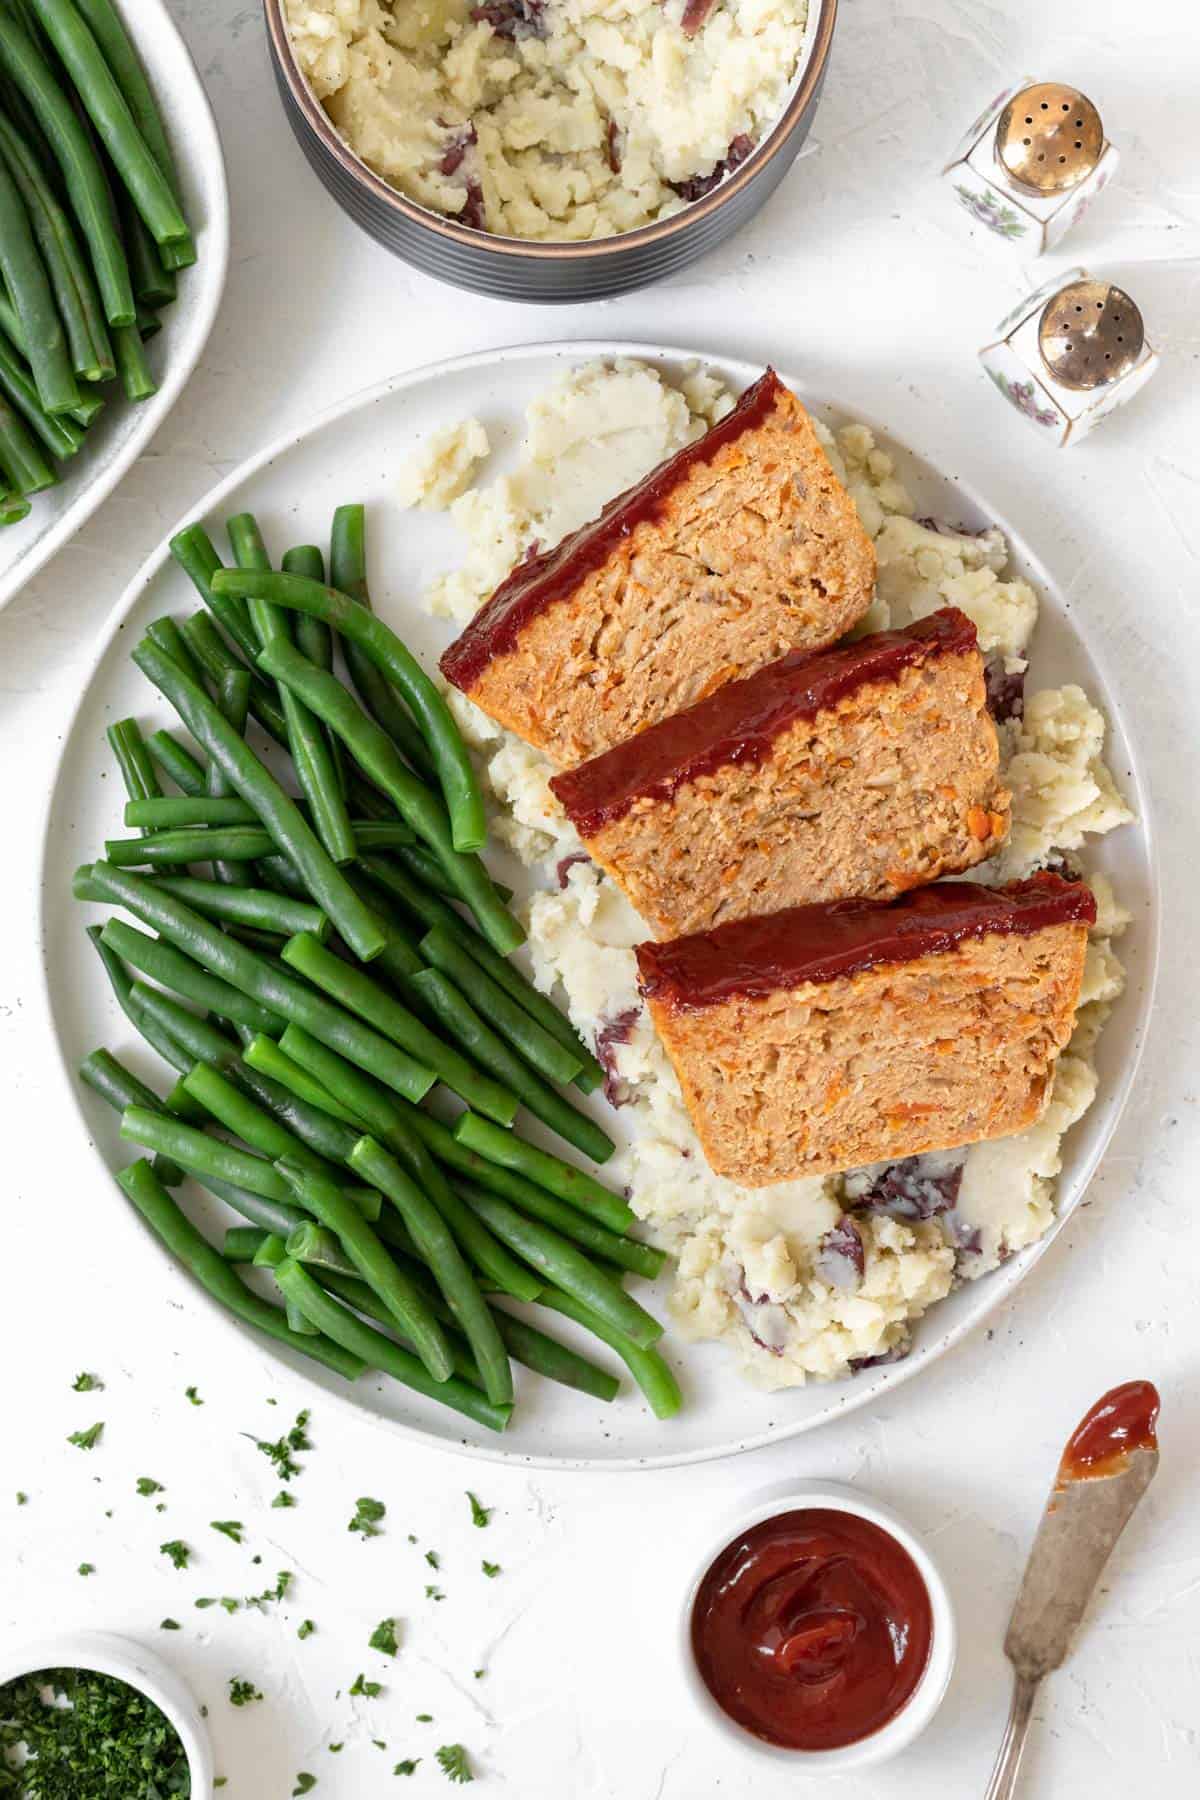 A dinner plate filled with mashed potatoes, green beans, and 3 slices of ground chicken meatloaf.